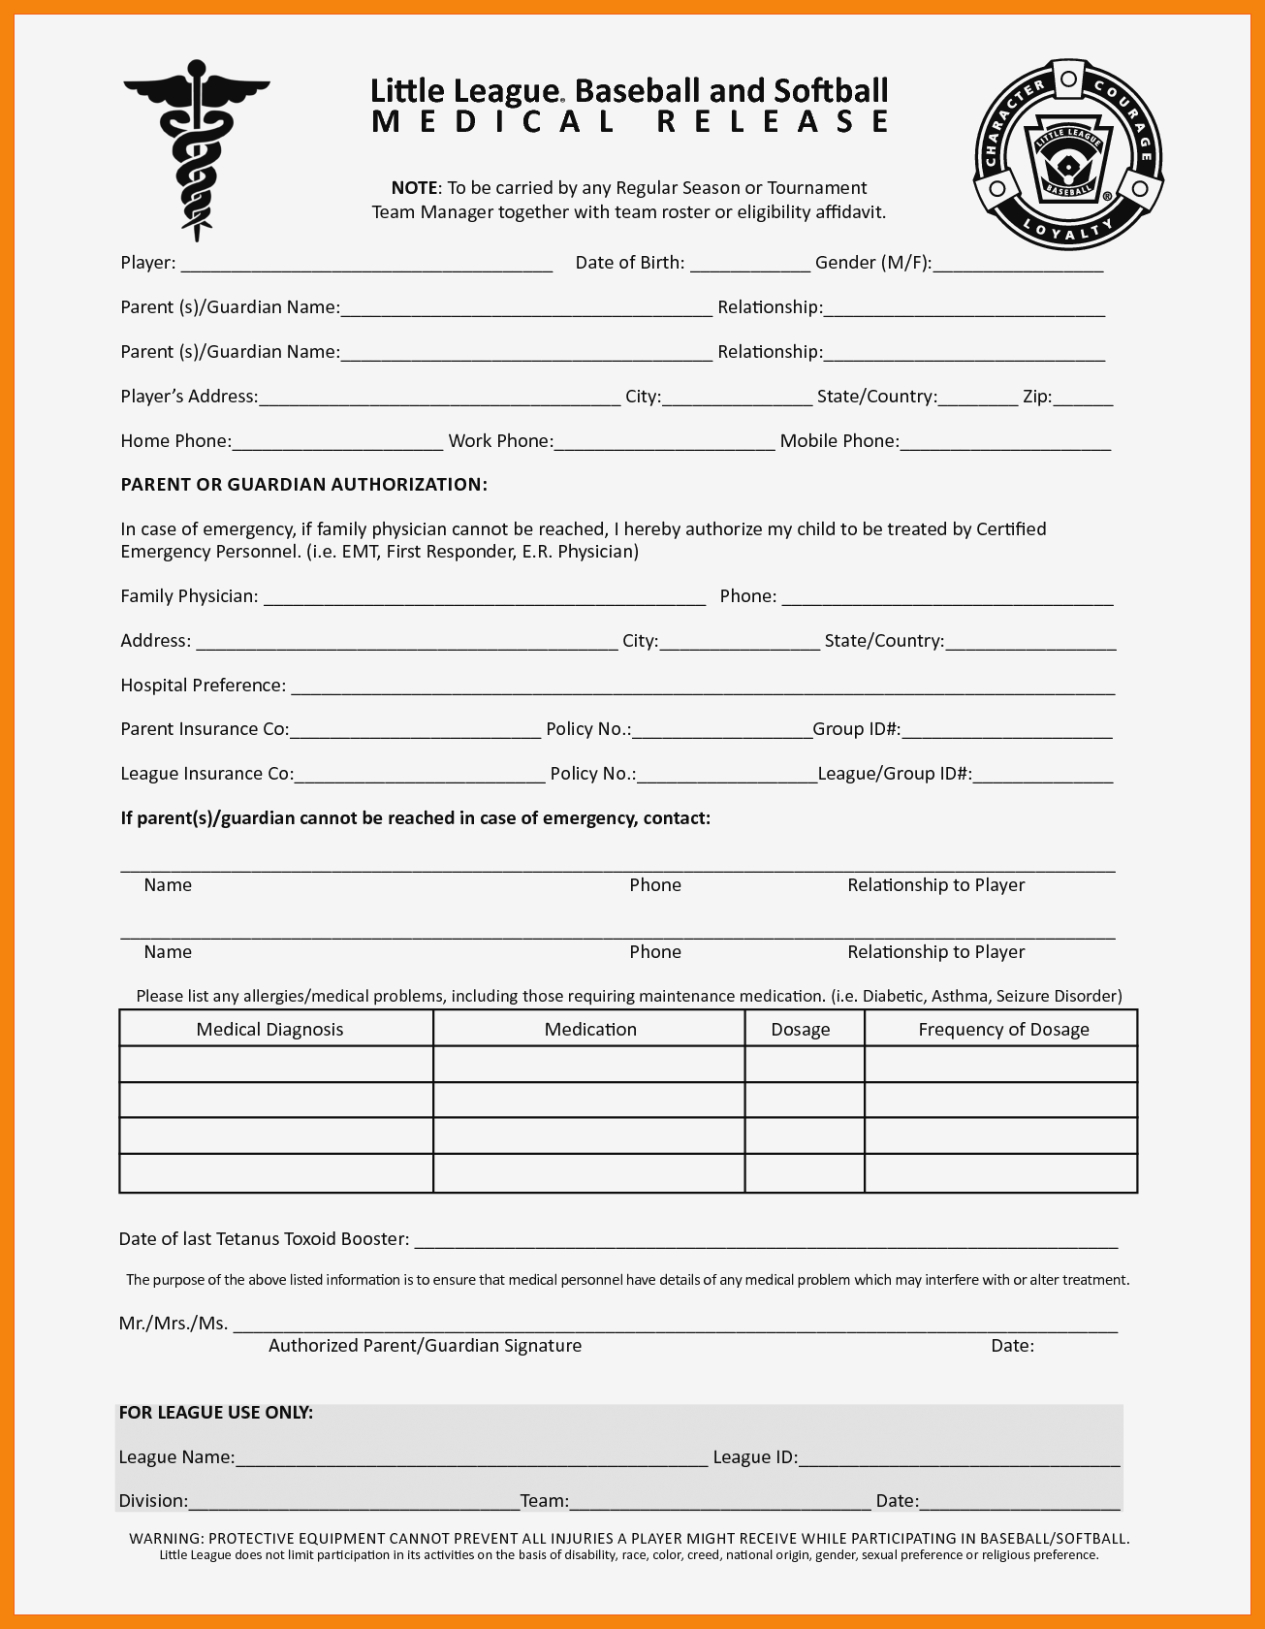 Free Medical Office Forms Printable